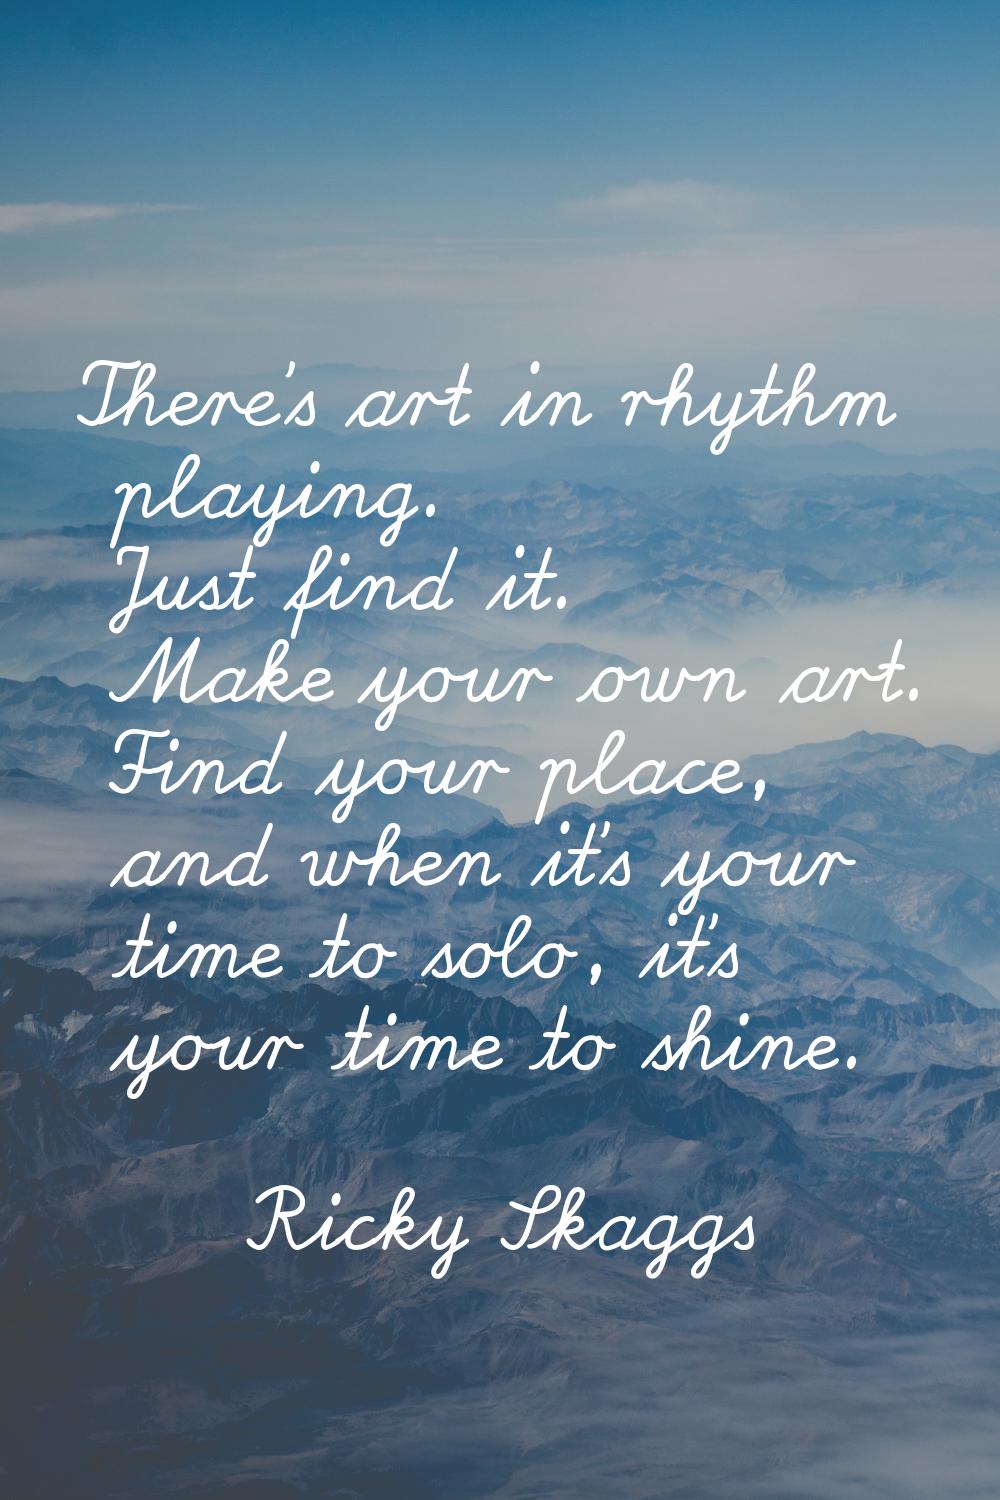 There's art in rhythm playing. Just find it. Make your own art. Find your place, and when it's your